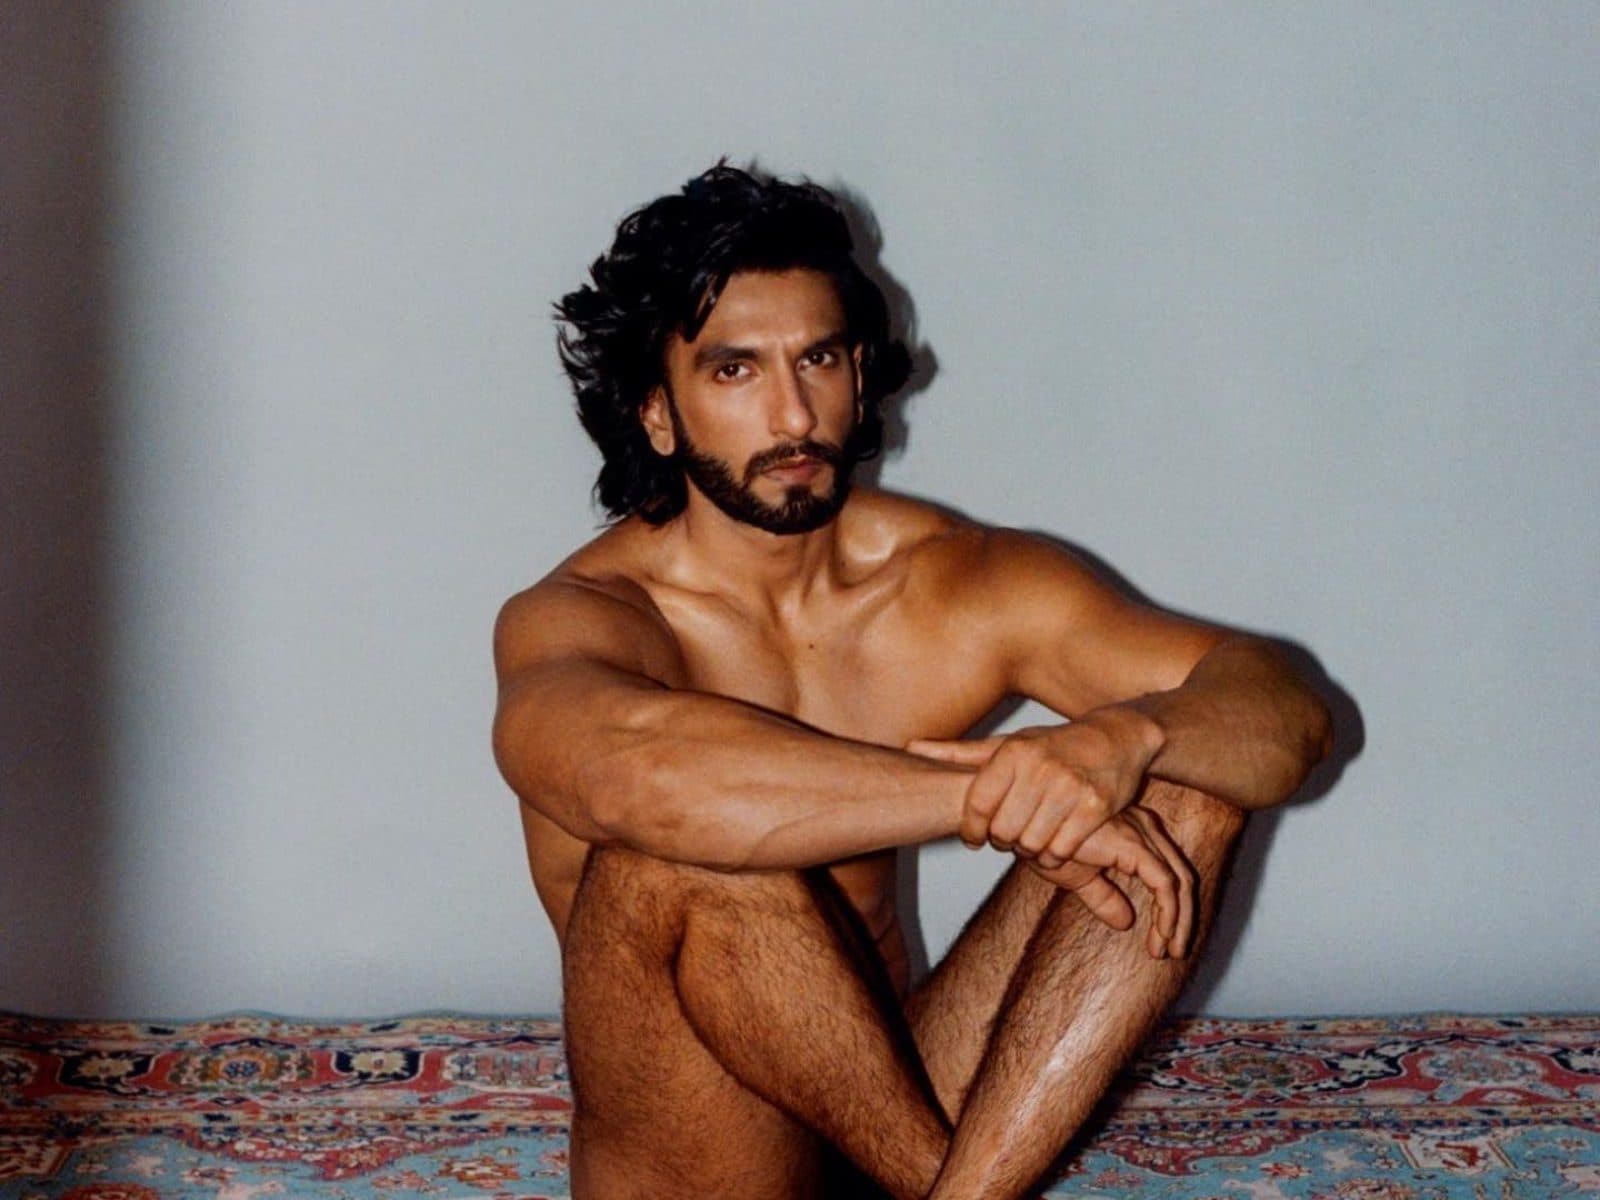 Grup Nude Indian Sluts - BuzzFix: Why Ranveer Singh's Masculinity Redefining Nude Shoot Does Not  Insult Women's Modesty